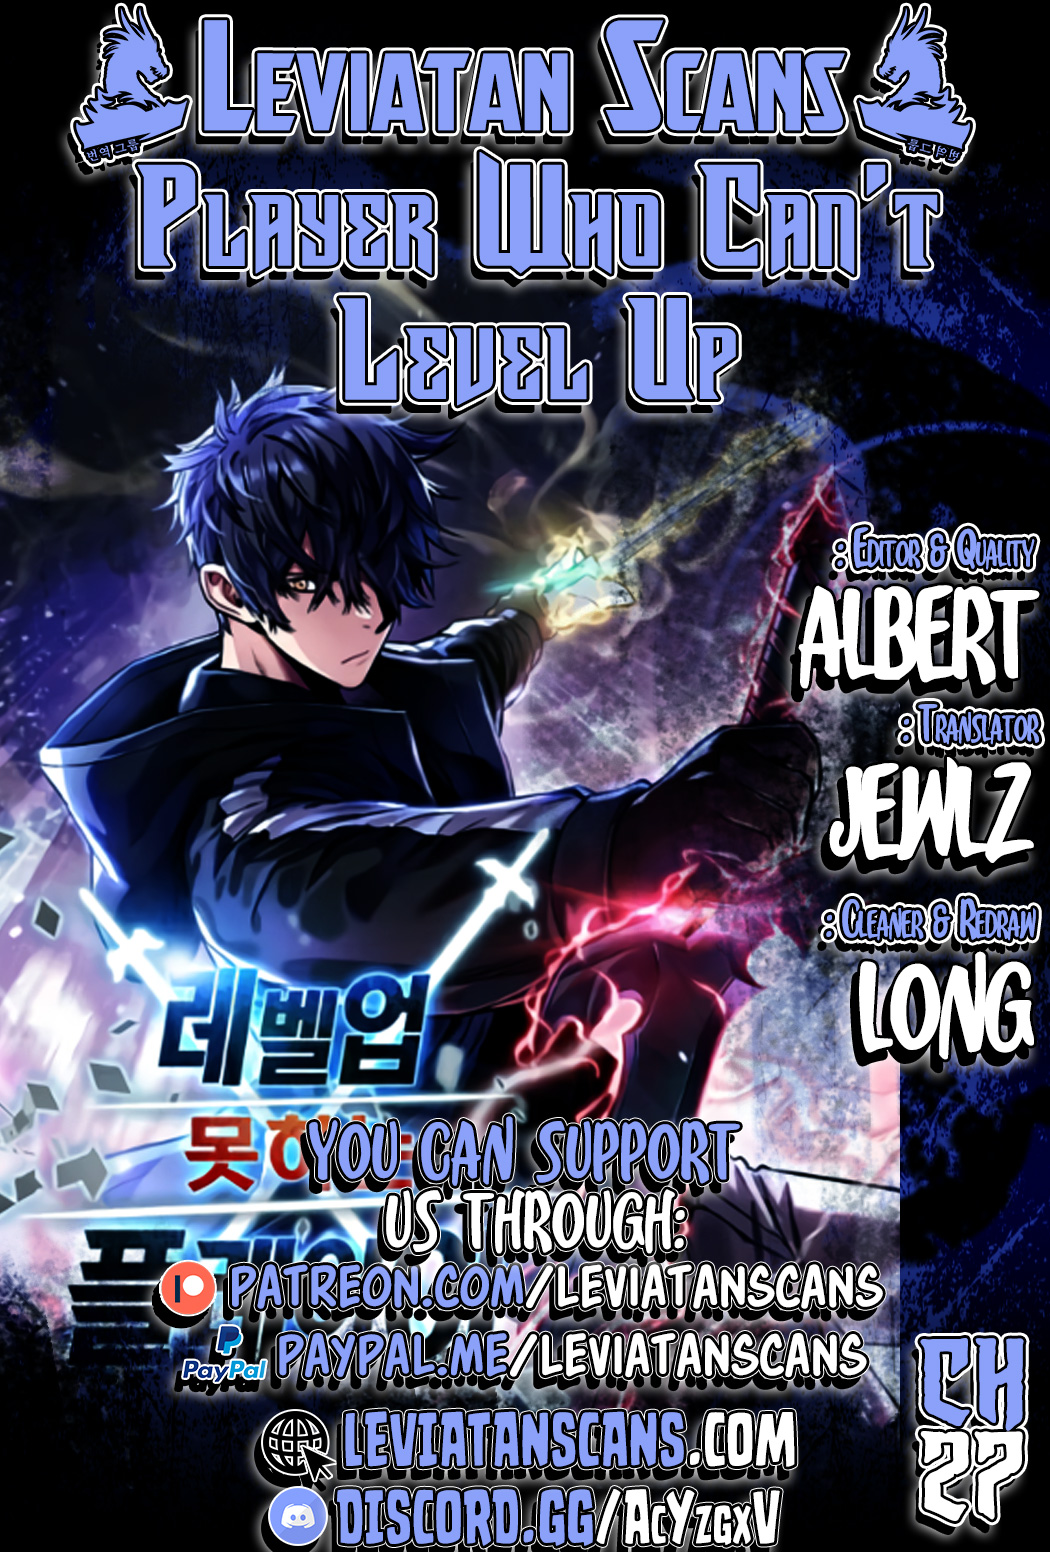 The Player That Can't Level Up - Chapter 2555 - Image 1